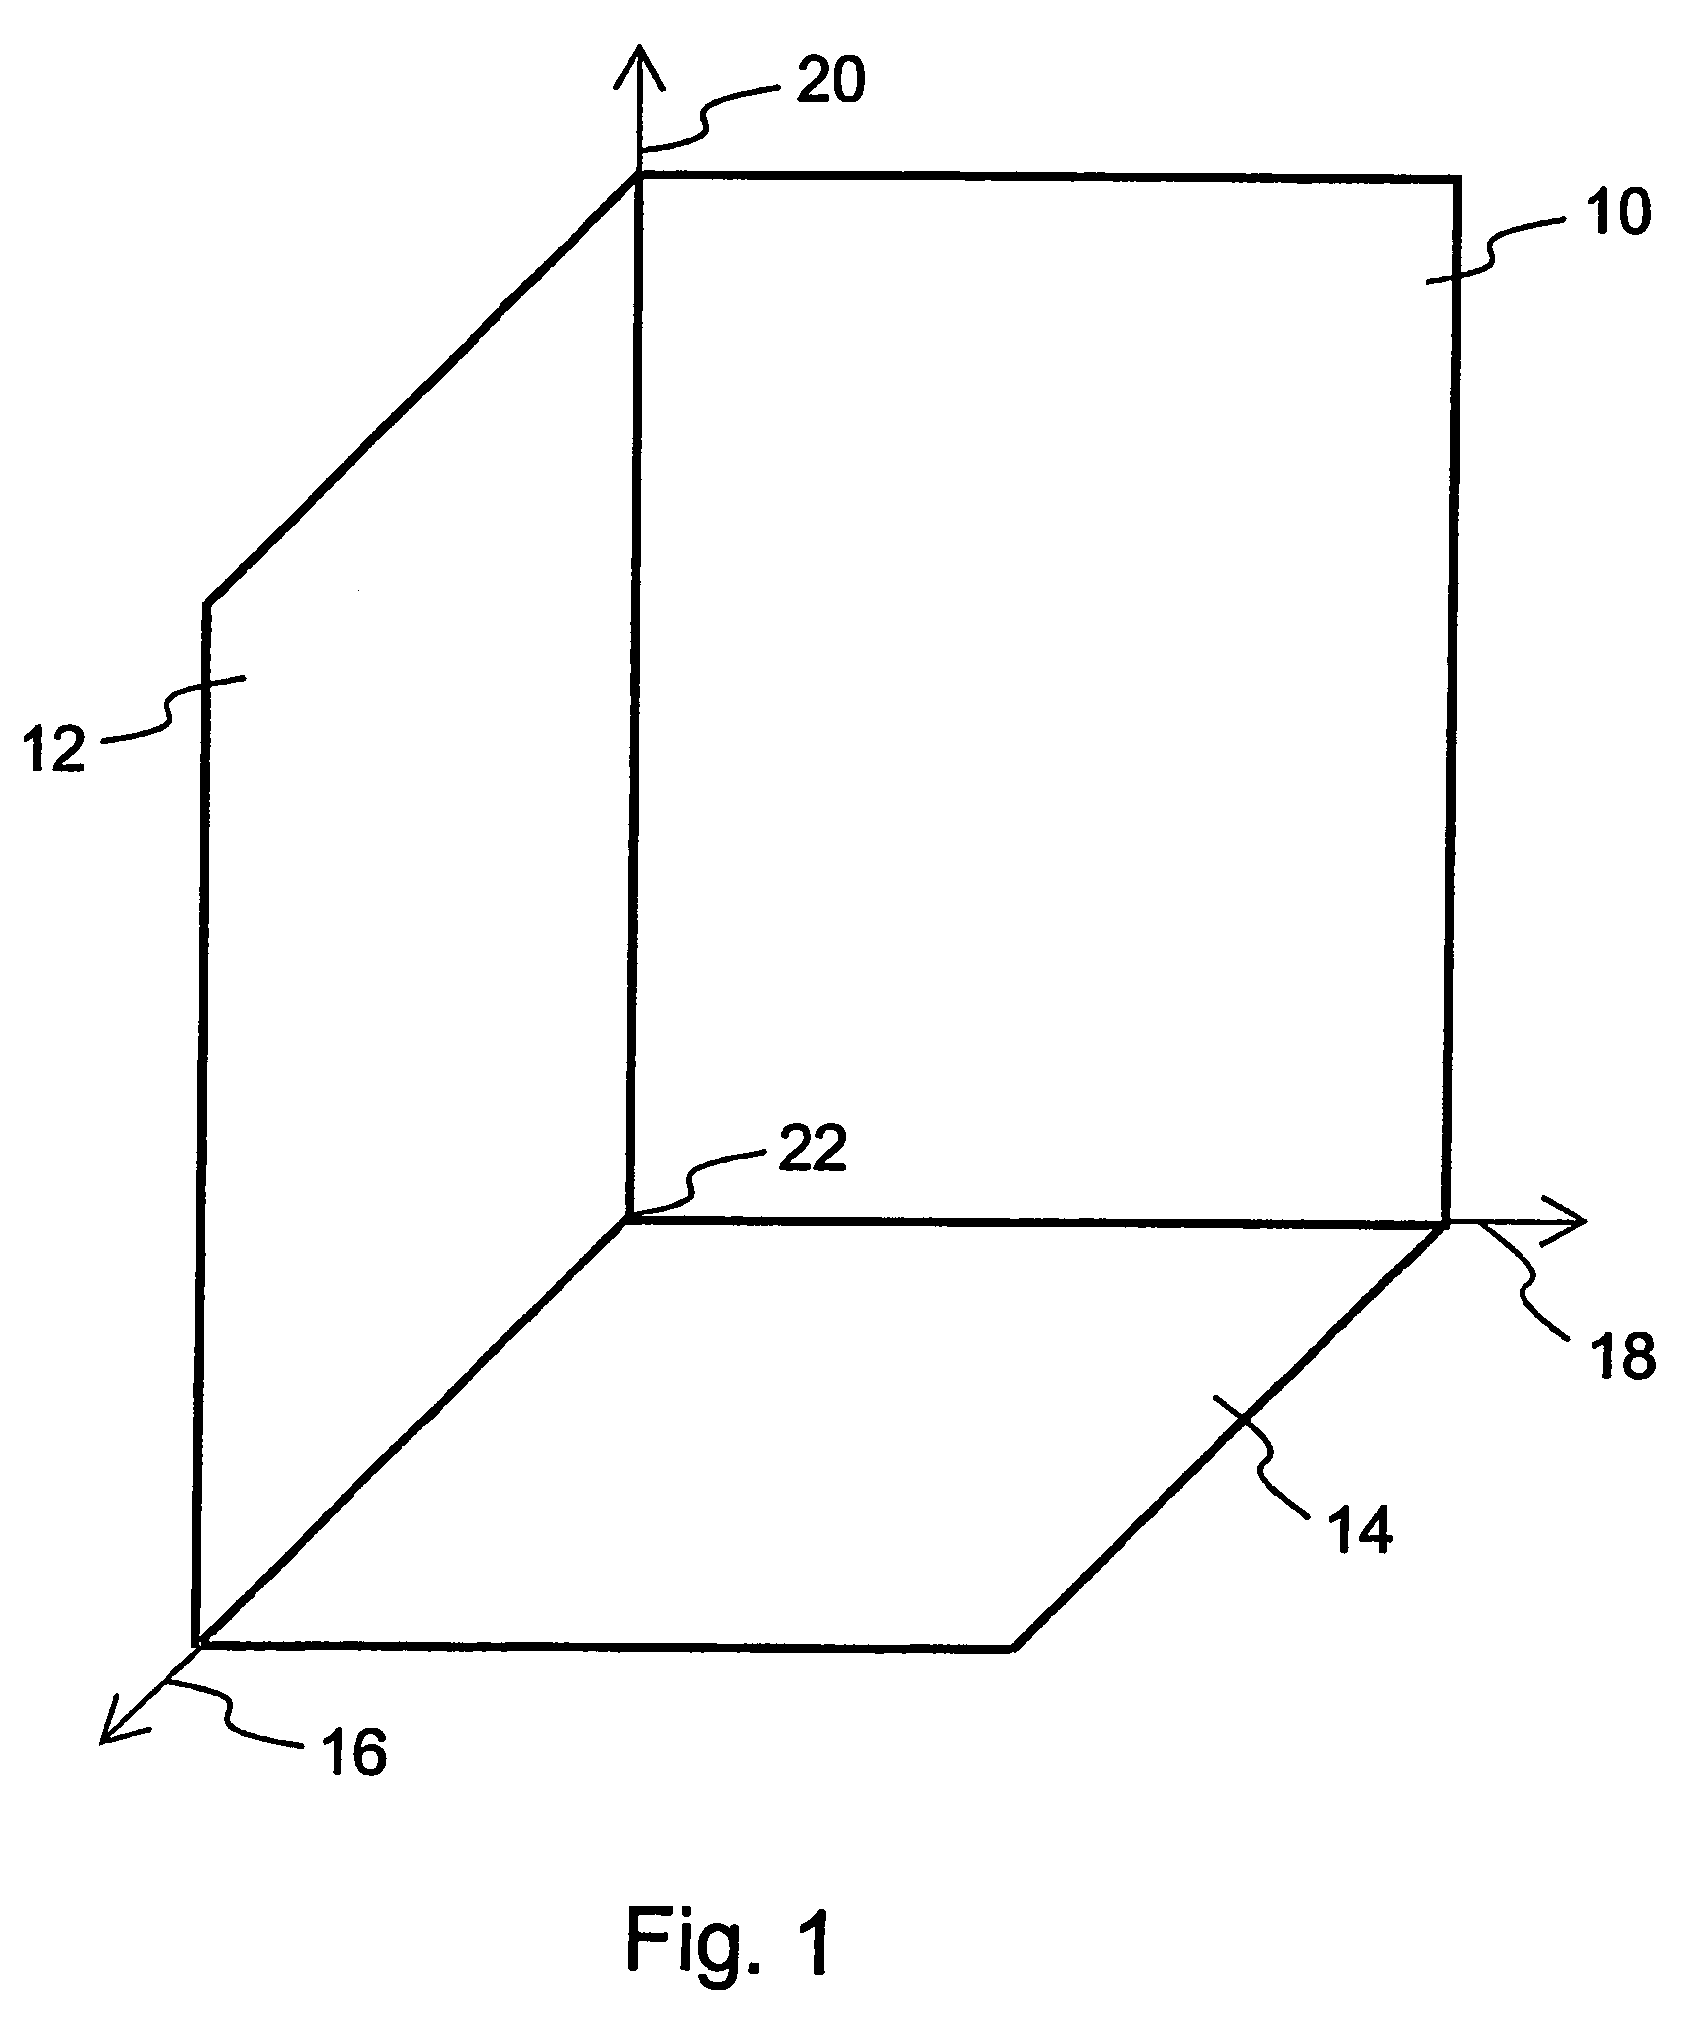 User-interface and method for curved multi-planar reformatting of three-dimensional volume data sets